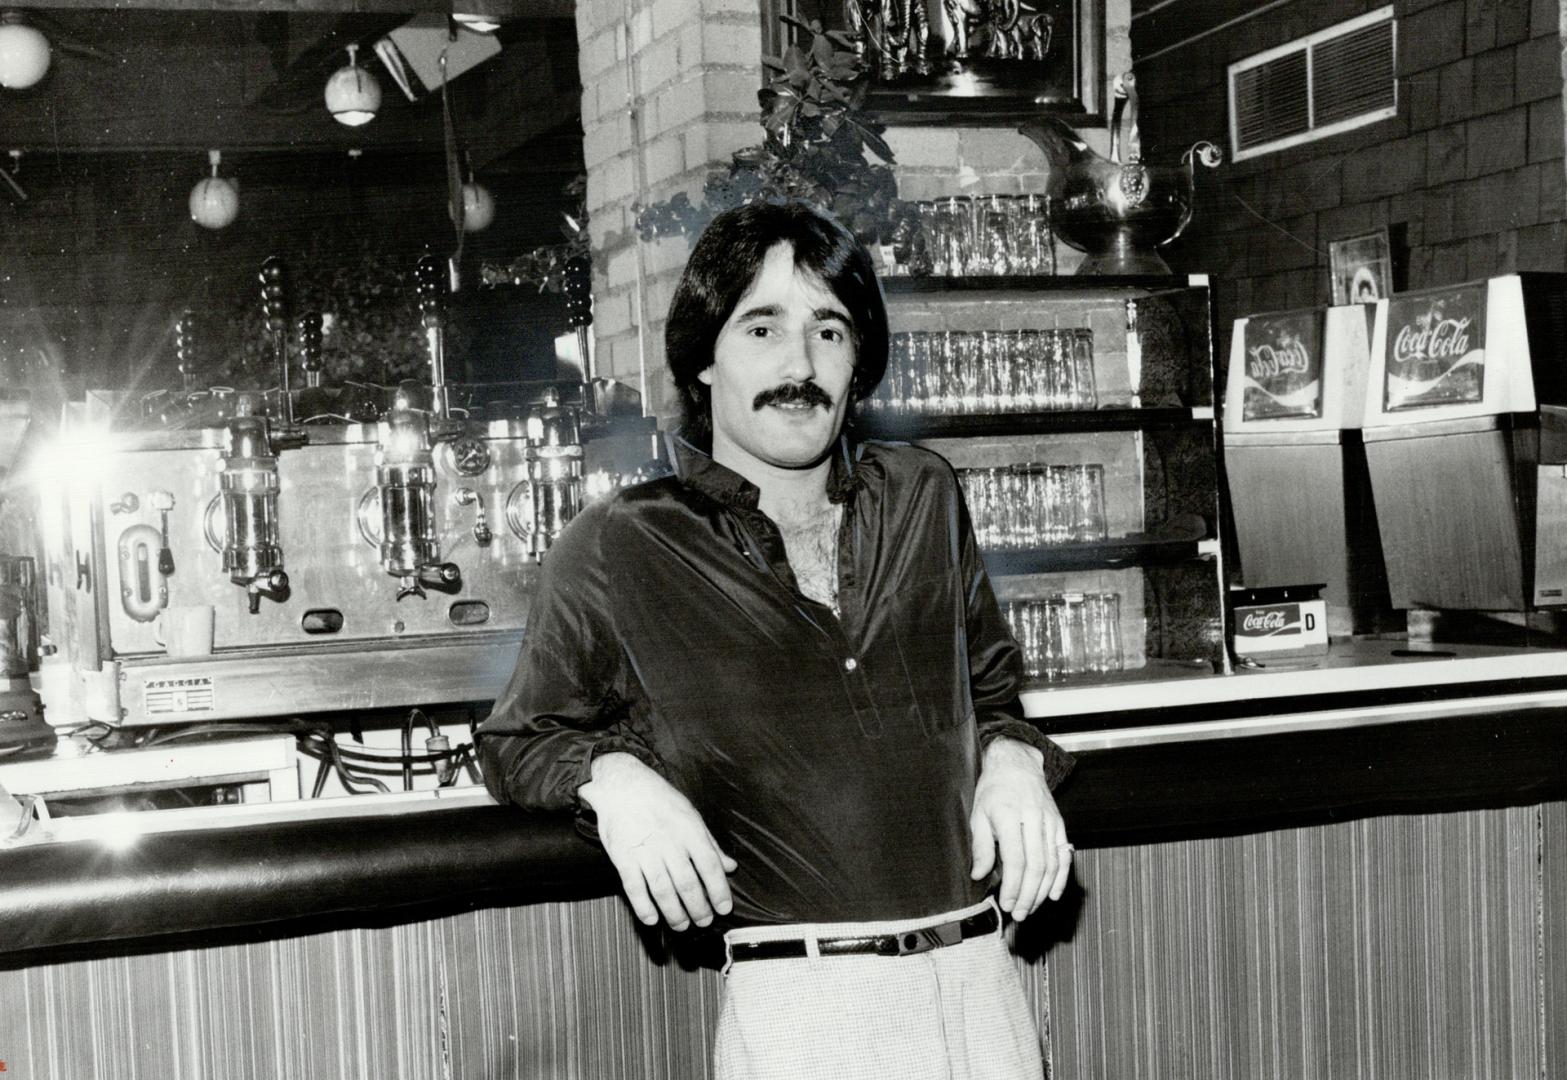 His disco lives: Manny Mota, owner of Le Club, has operated the after-hours  disco for three years - something of a longevity record for city discos –  All Items – Digital Archive :